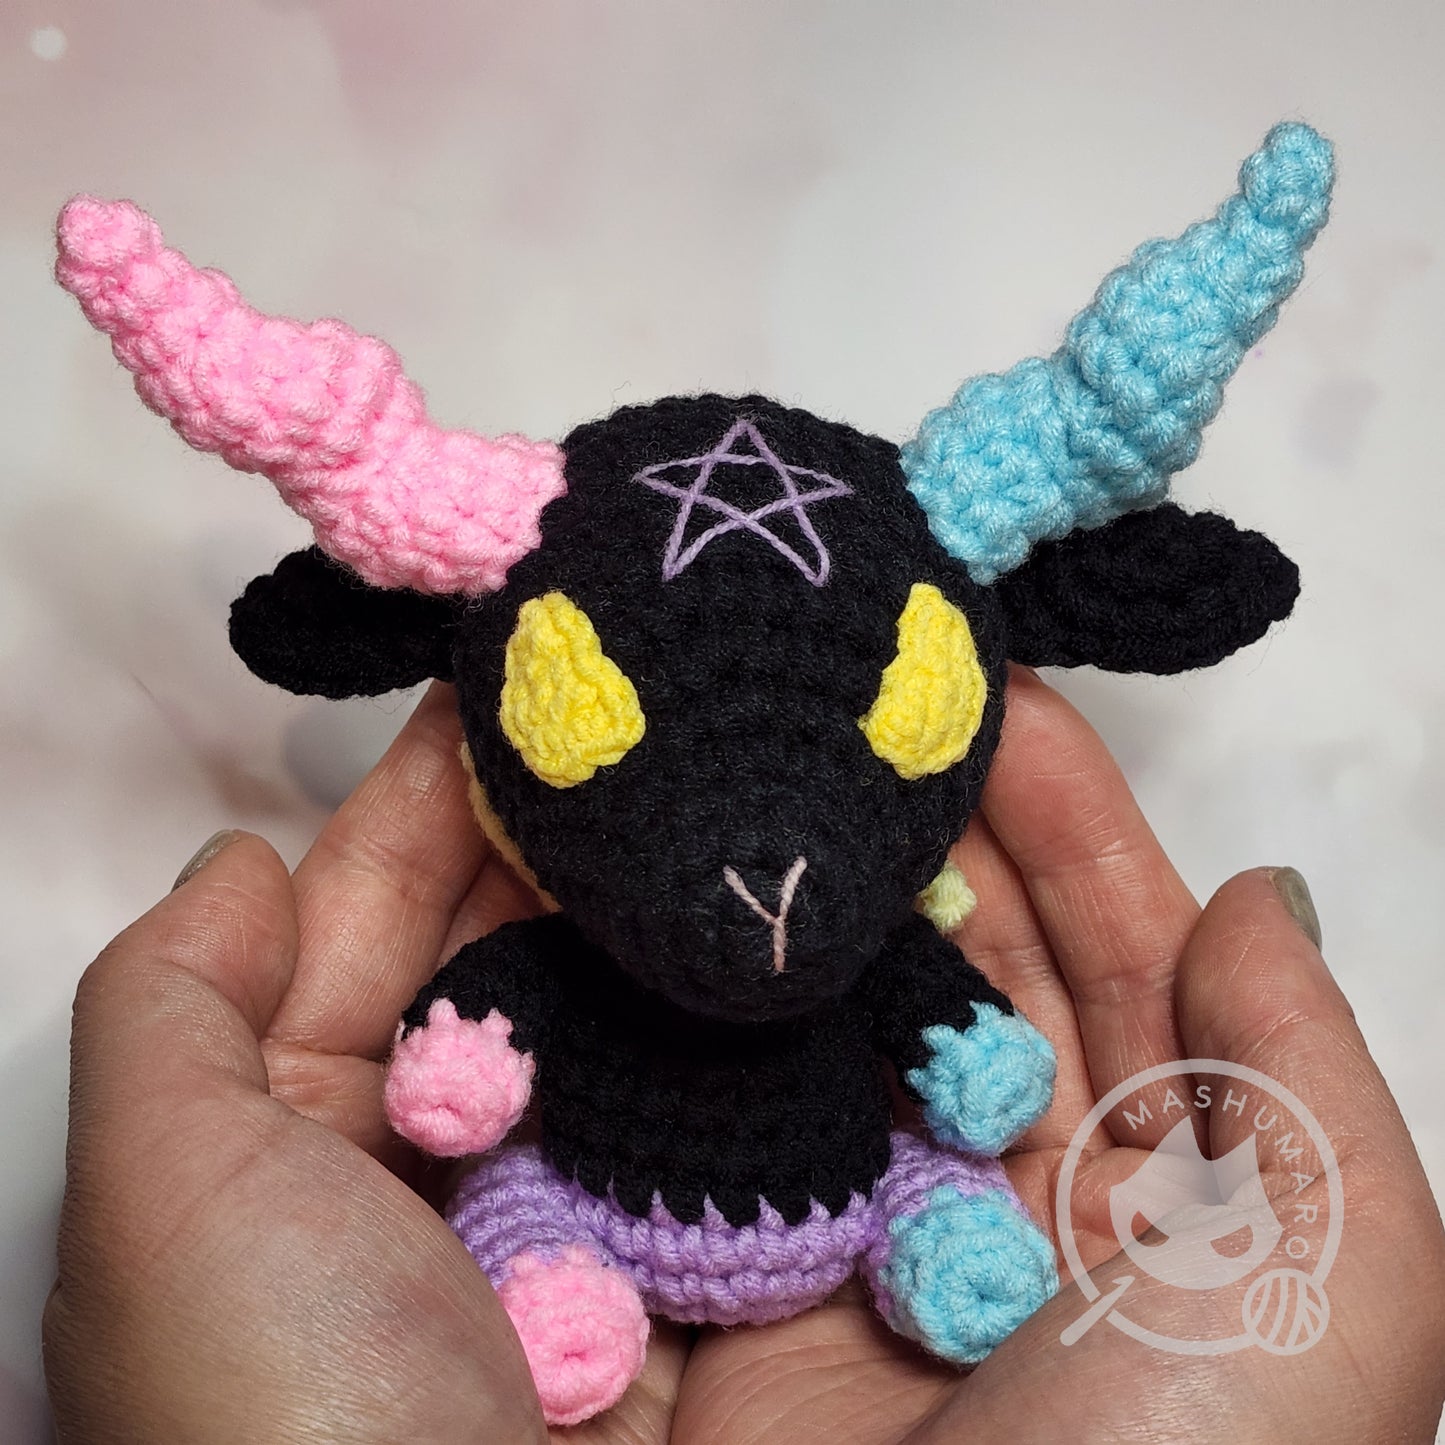 Chibi Baby Baphomet with Wings